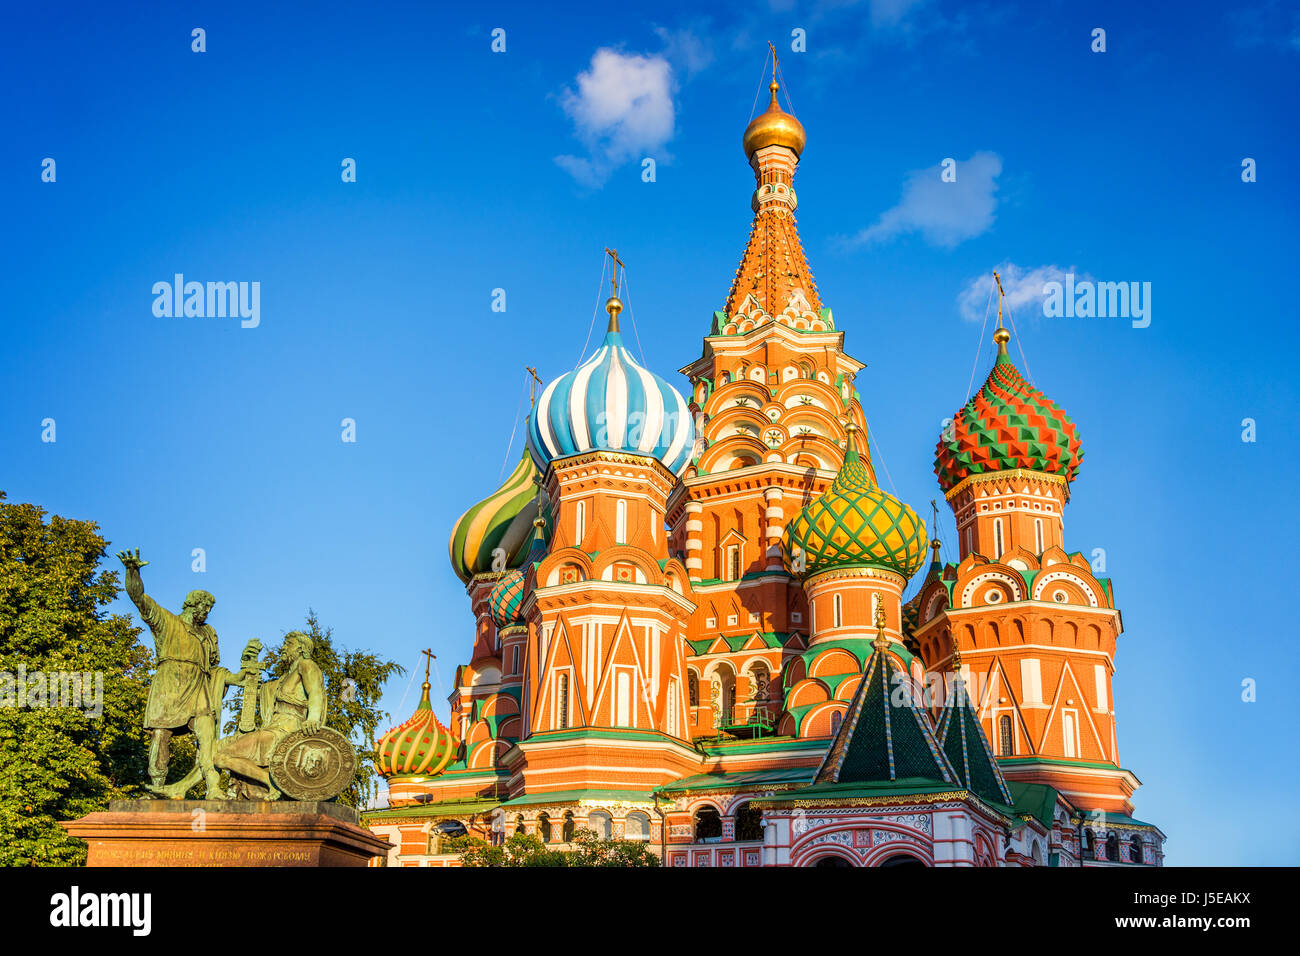 Monument to Minin and Pozharsky and St Basil's cathedral on Red Square, Moscow, Russia Stock Photo